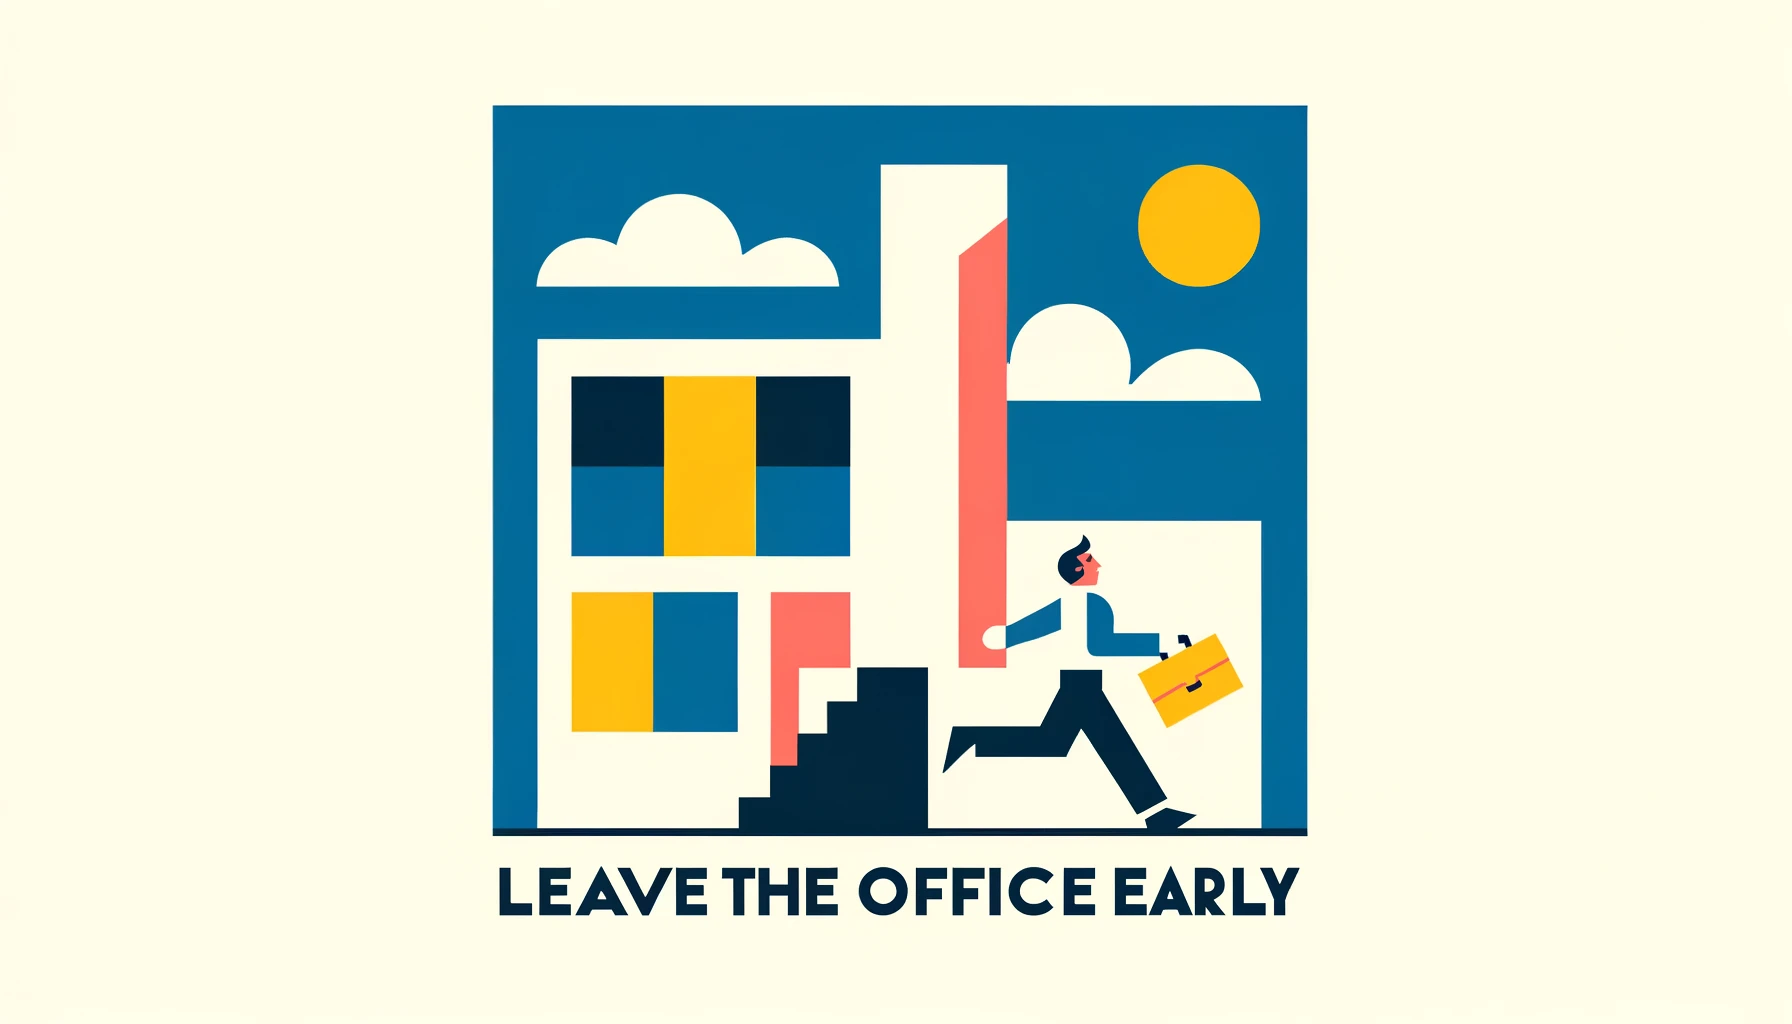 Motivational Messages for Enjoying Leave The Office Early Day